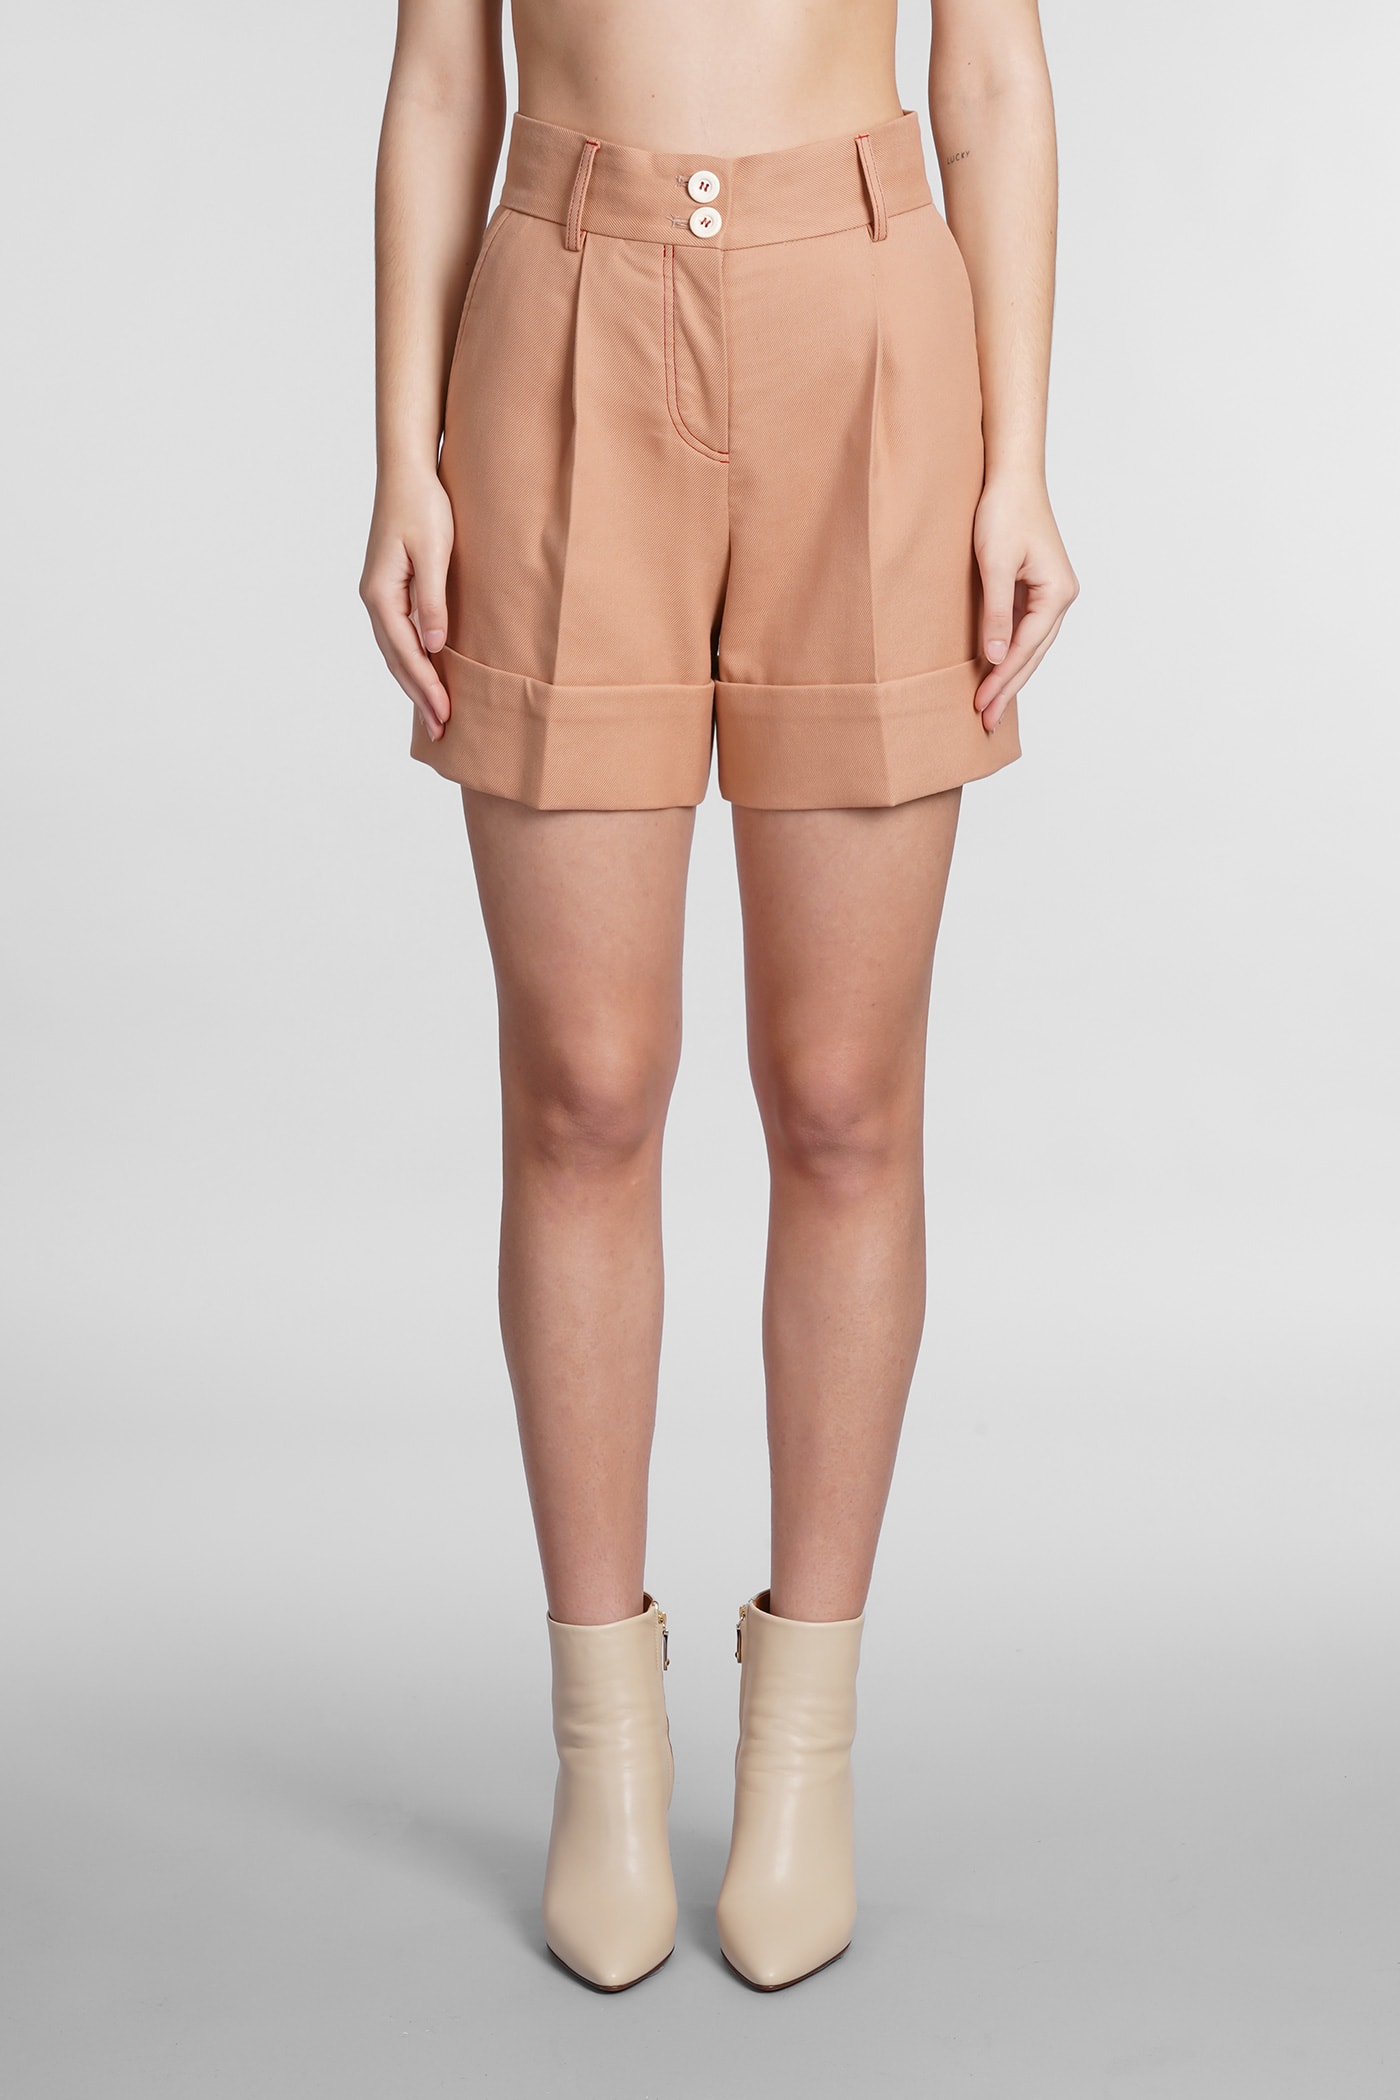 SEE BY CHLOÉ SHORTS IN POWDER COTTON